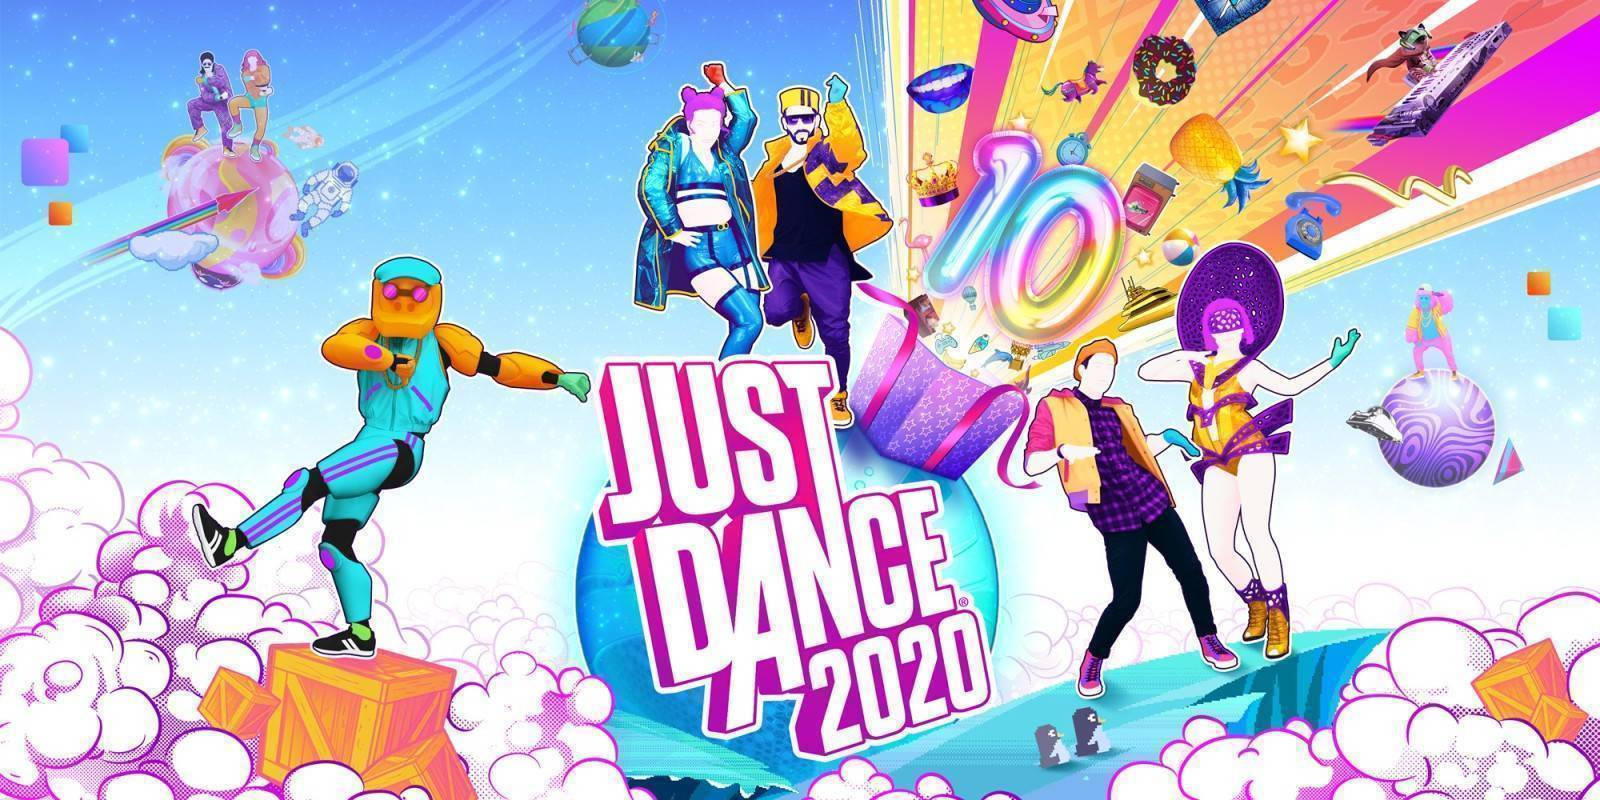 Dance 2020 (PS4) cheap Price of $10.79